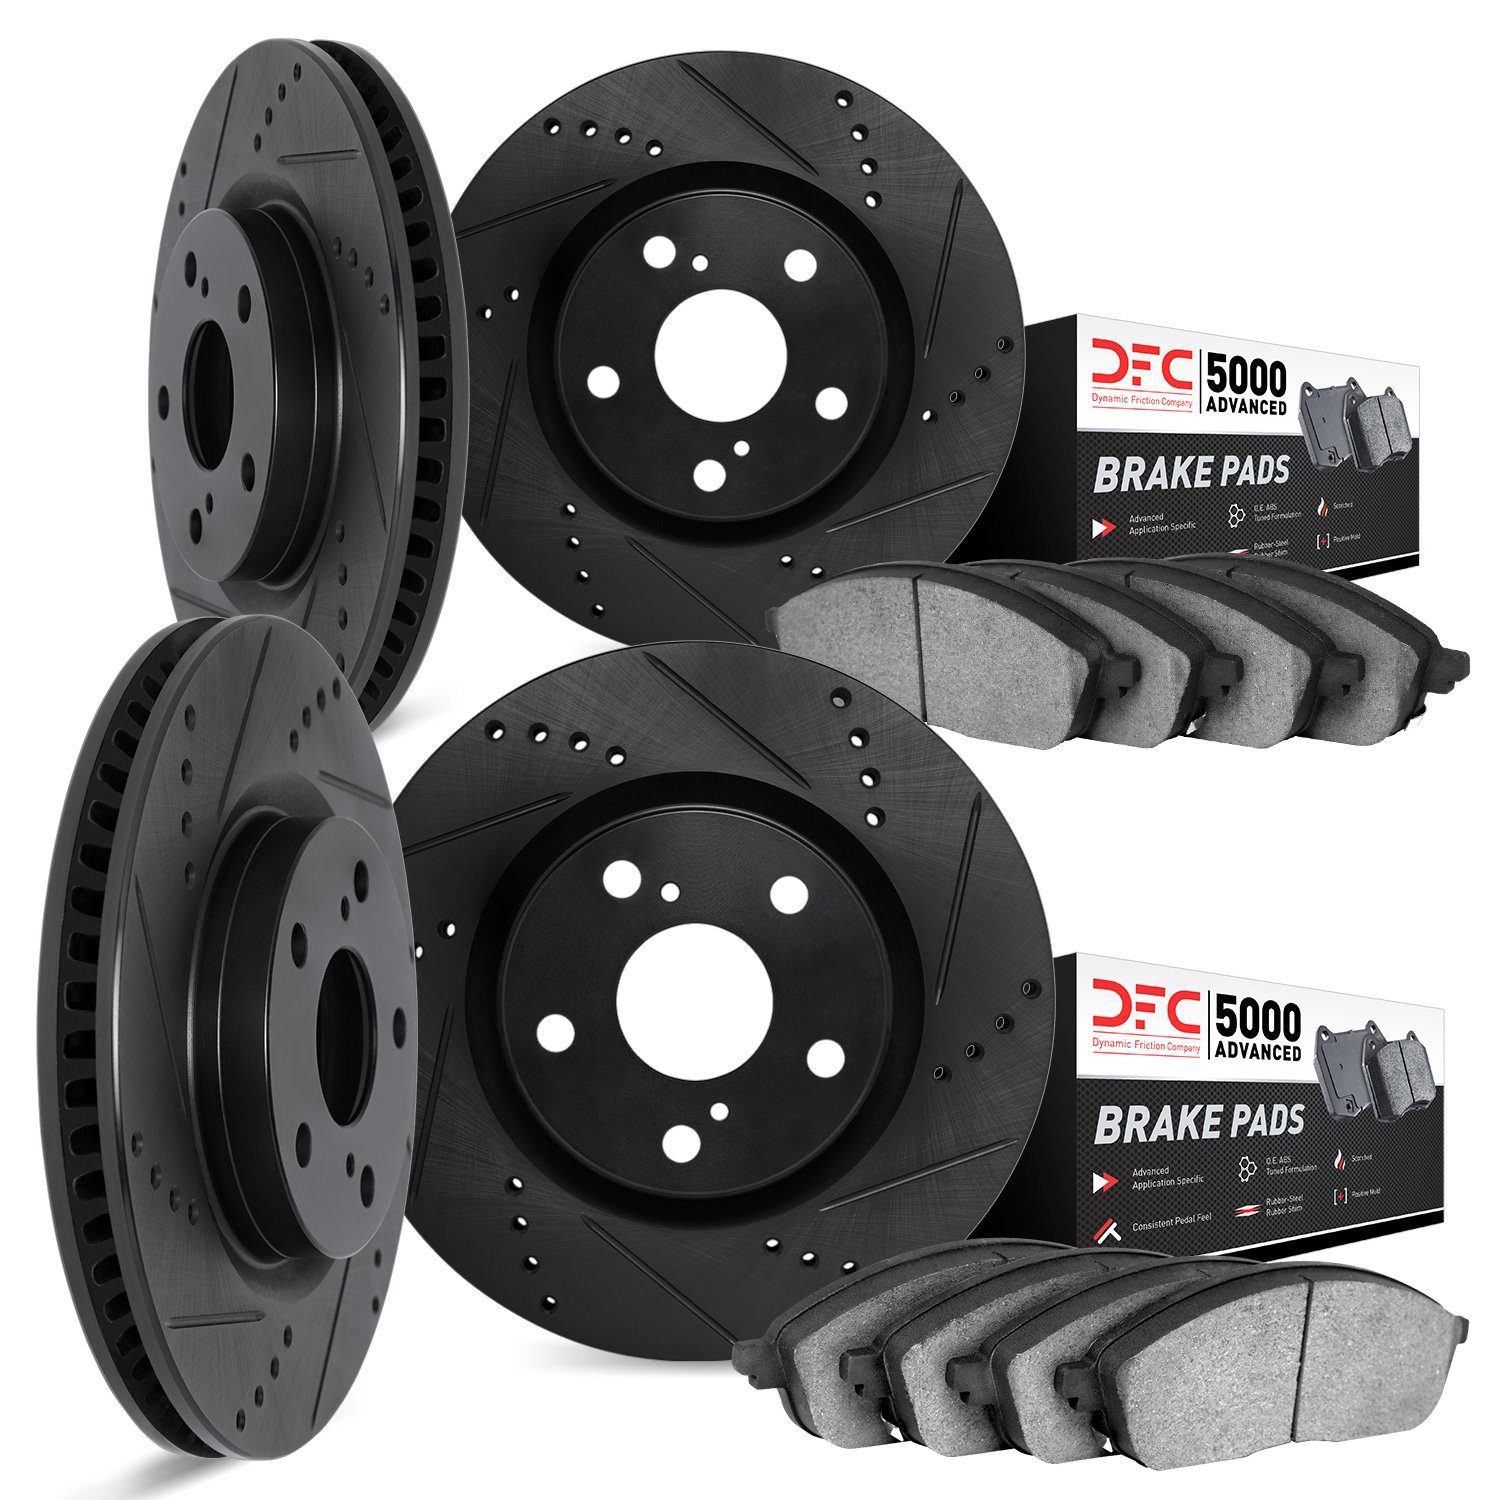 8504-63005 Drilled/Slotted Brake Rotors w/5000 Advanced Brake Pads Kit [Black], 2017-2017 Mercedes-Benz, Position: Front and Rea